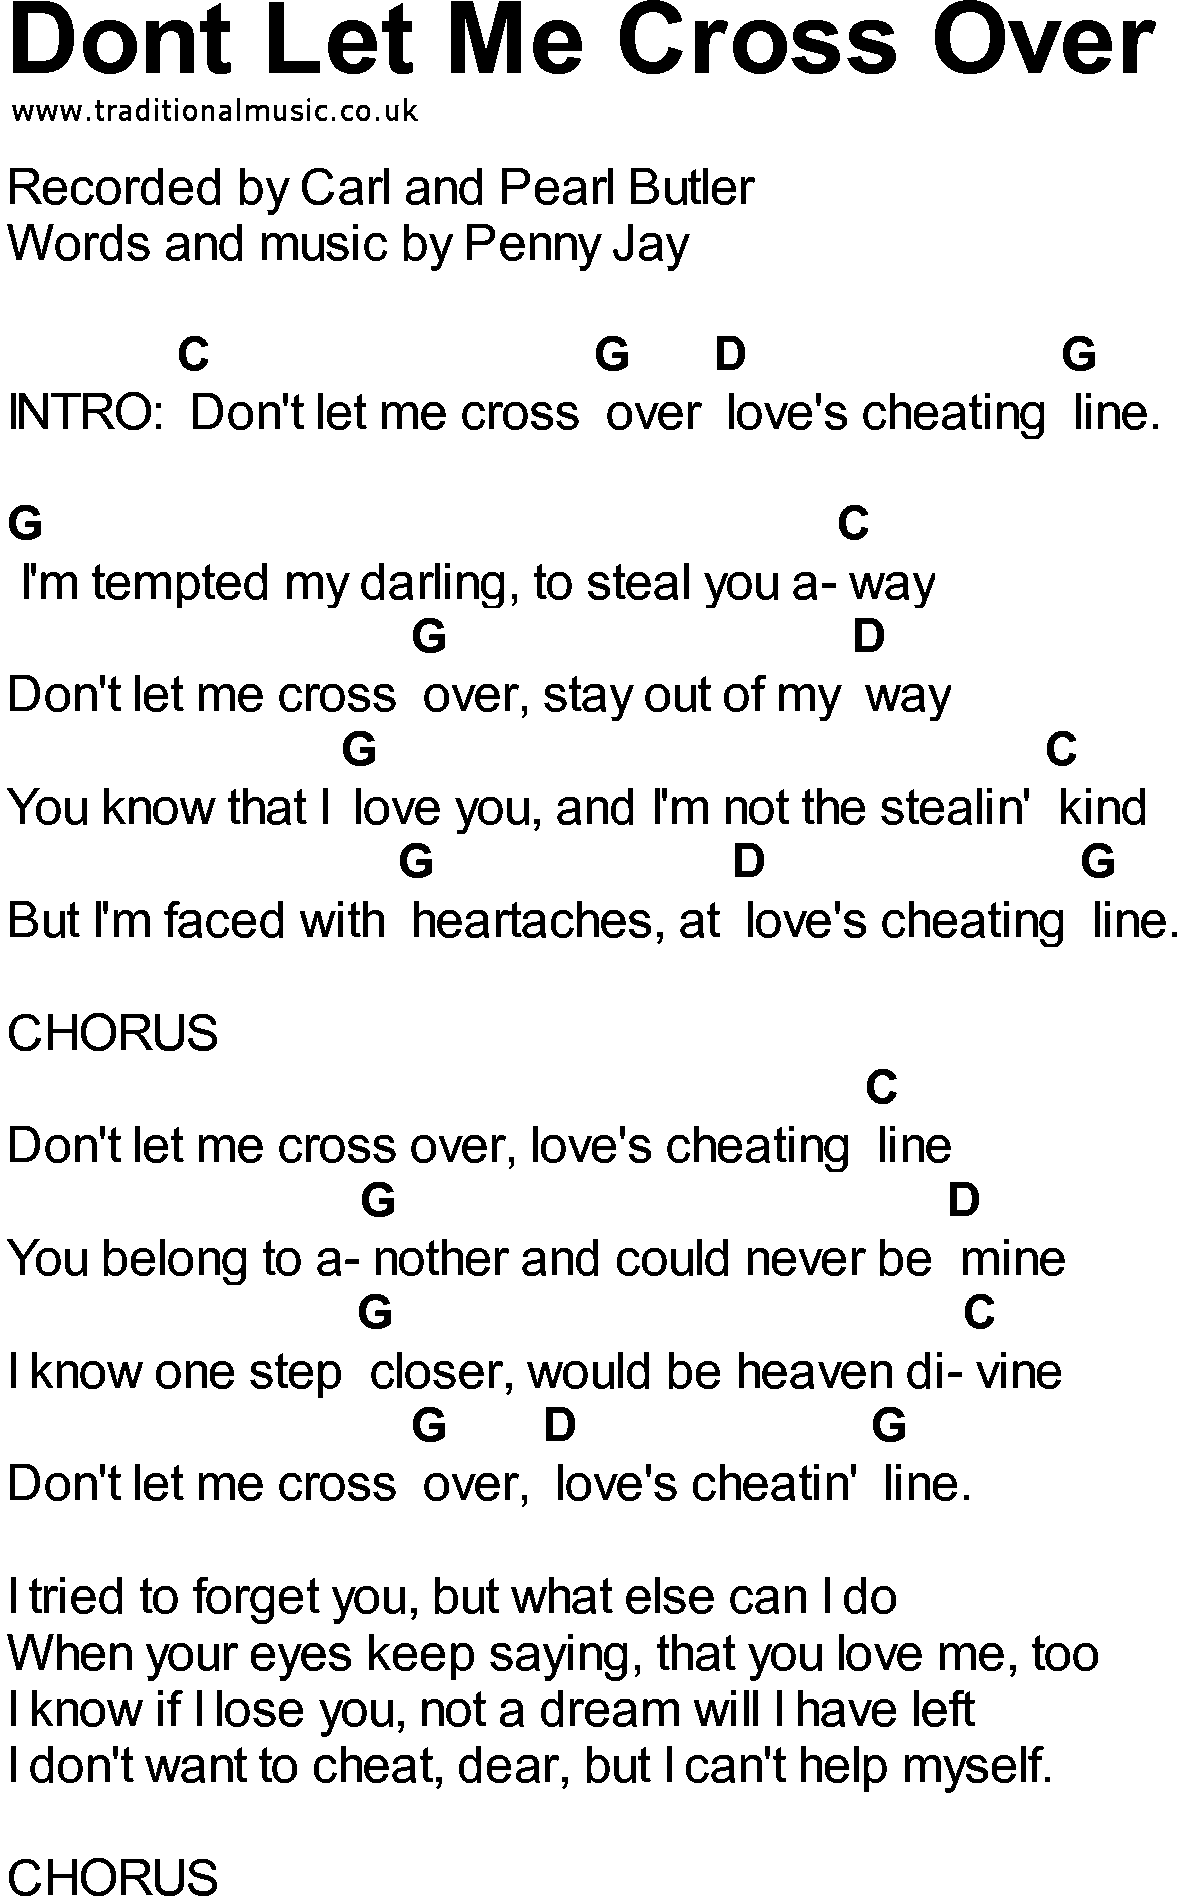 Bluegrass songs with chords - Dont Let Me Cross Over